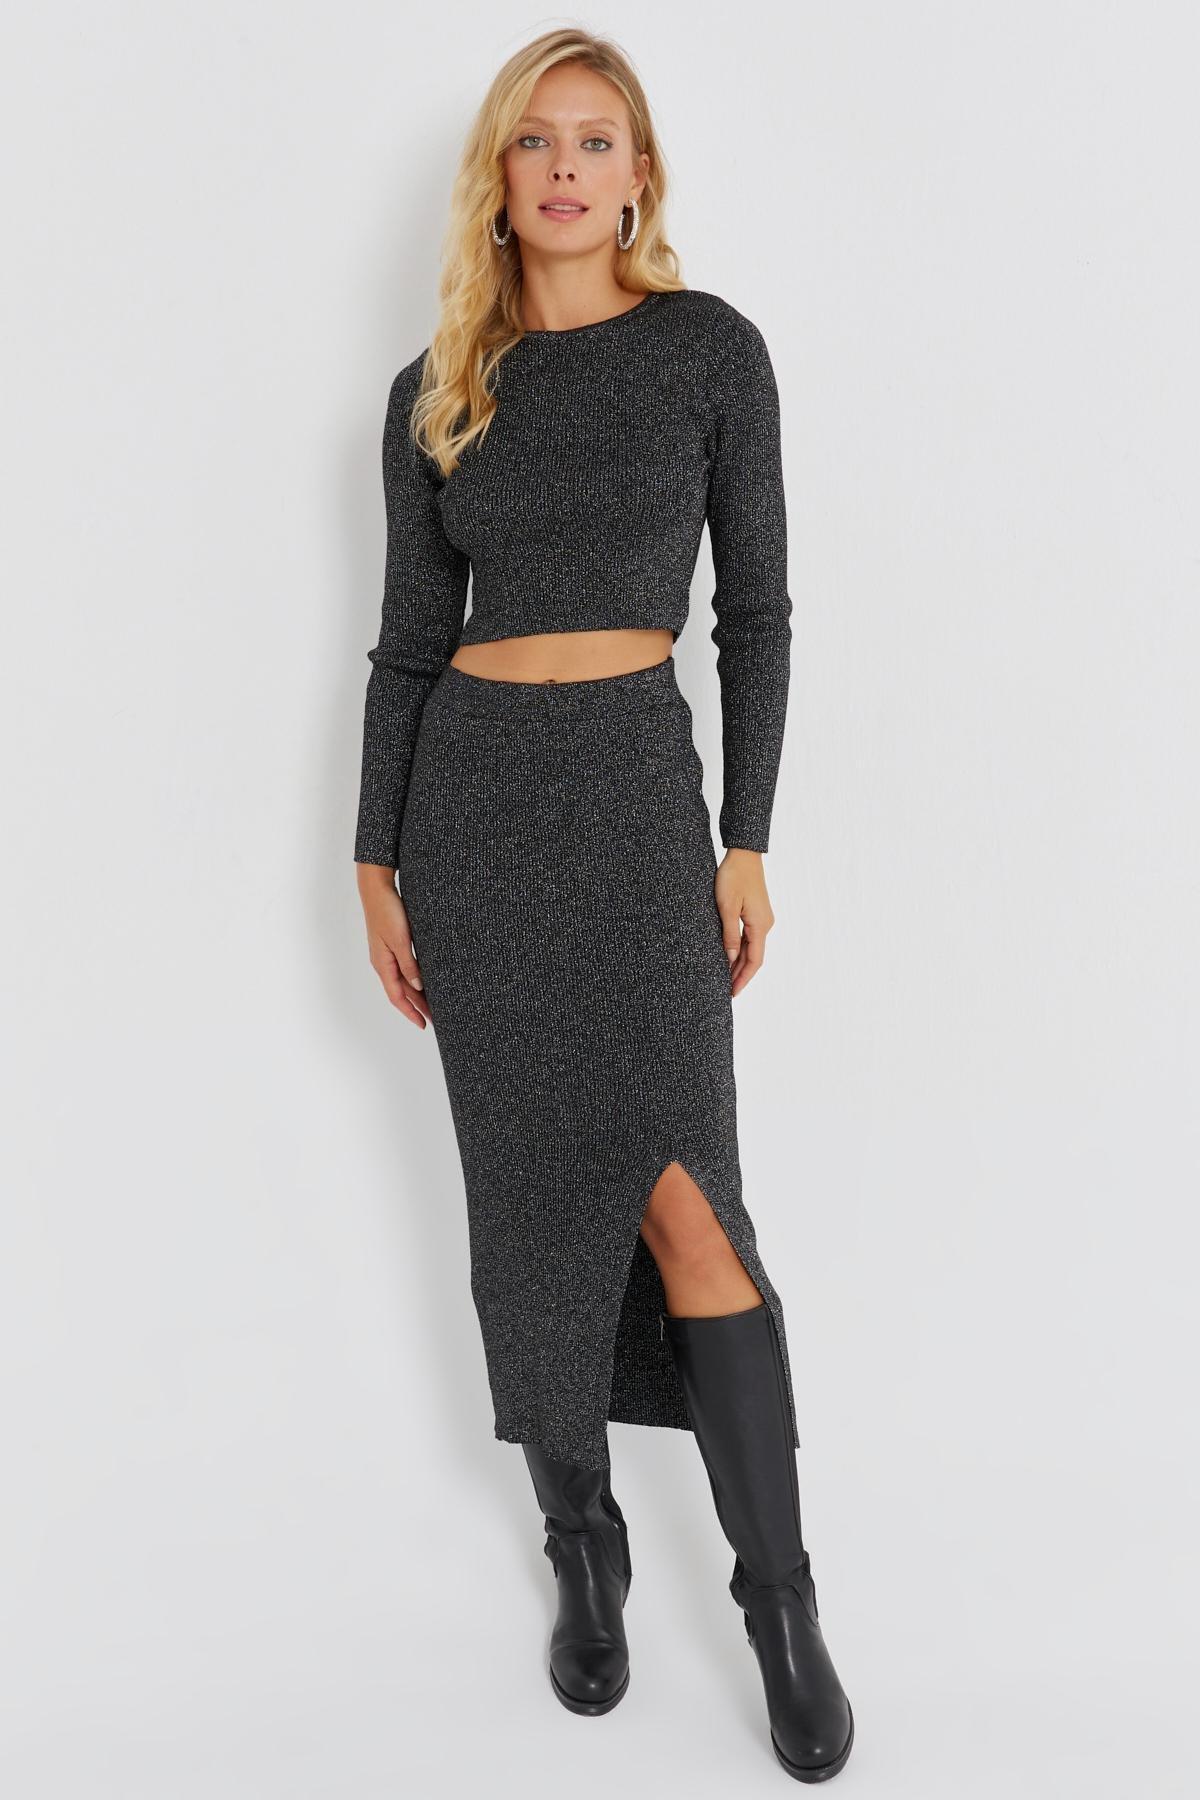 Cool & Sexy - Black Silvery Knitted Co-Ord Set